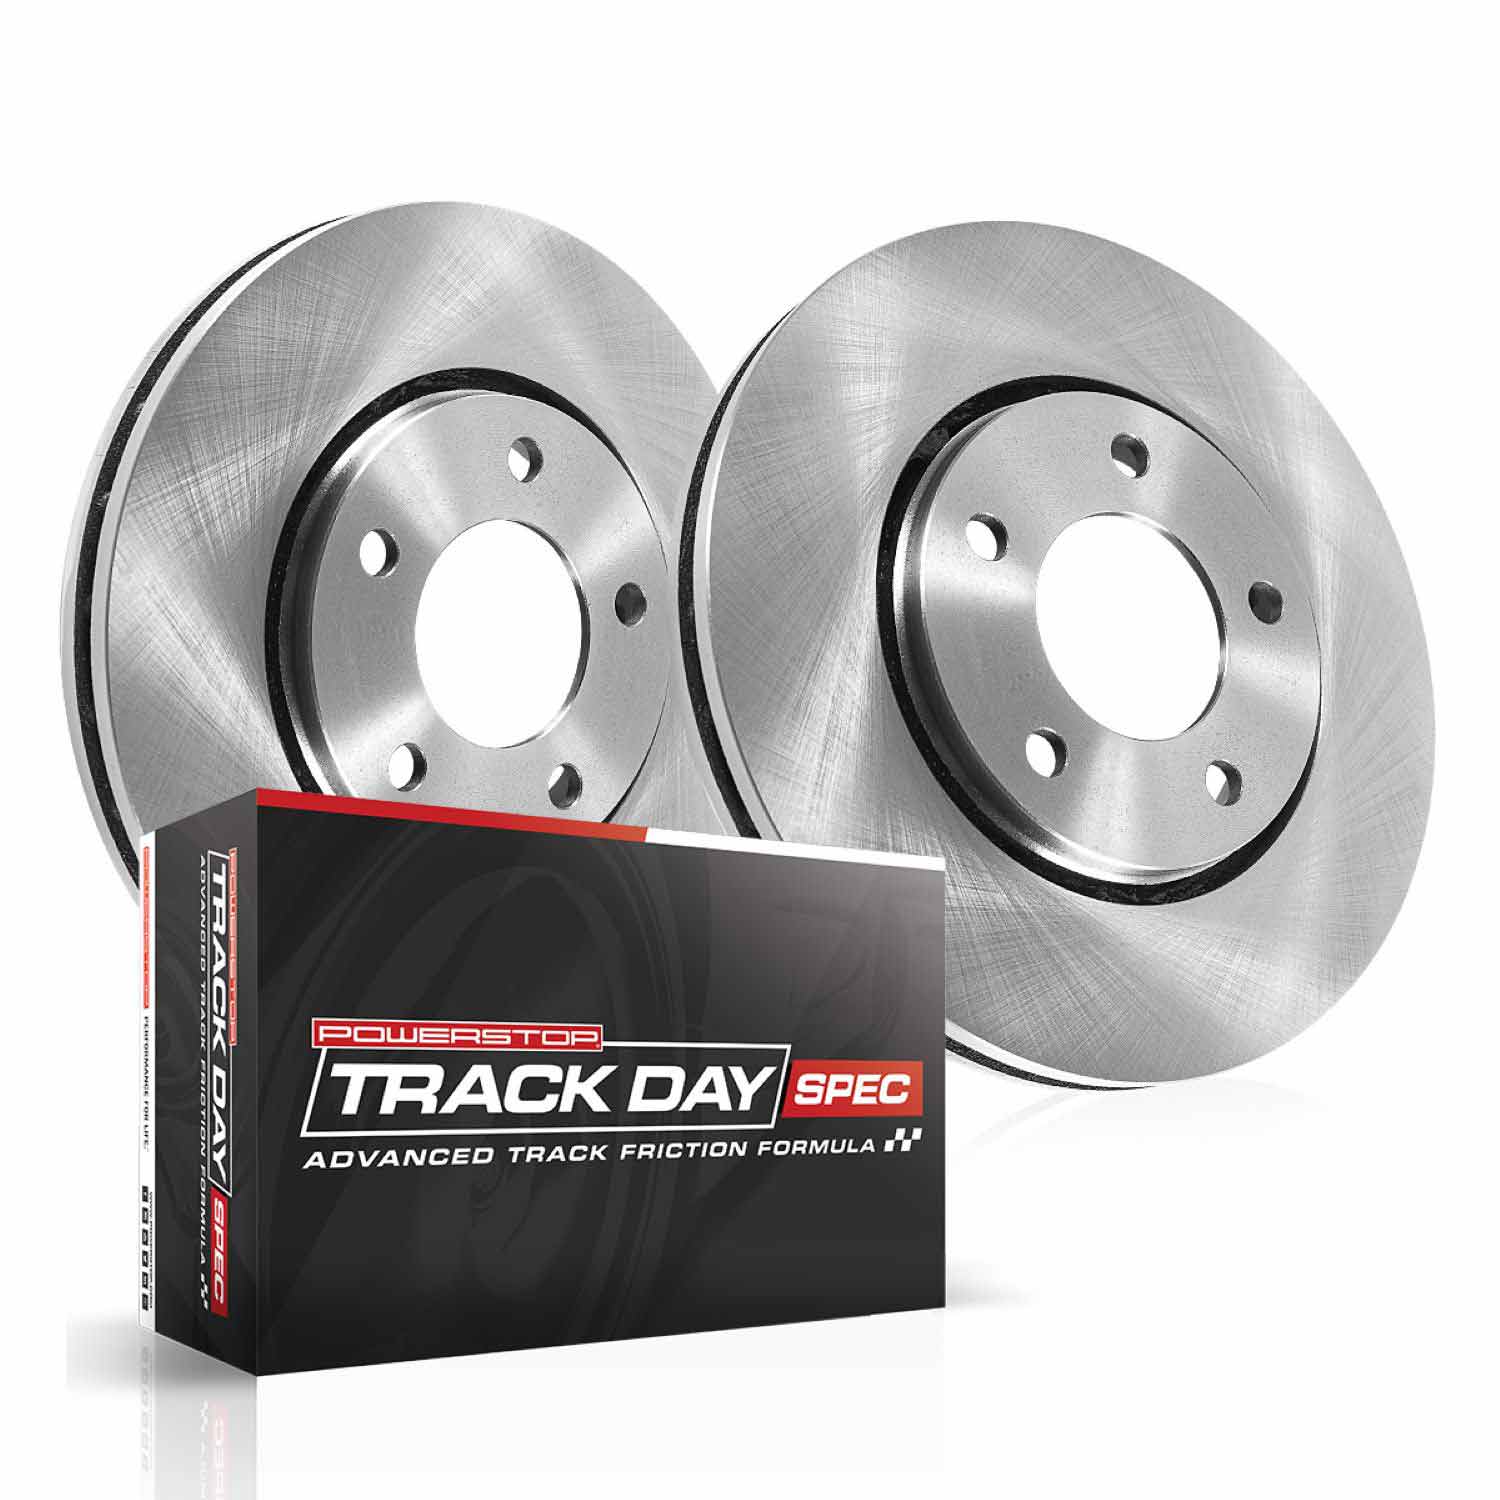 Brake Upgrade Kits for Sport, Utility & Daily Driving | PowerStop